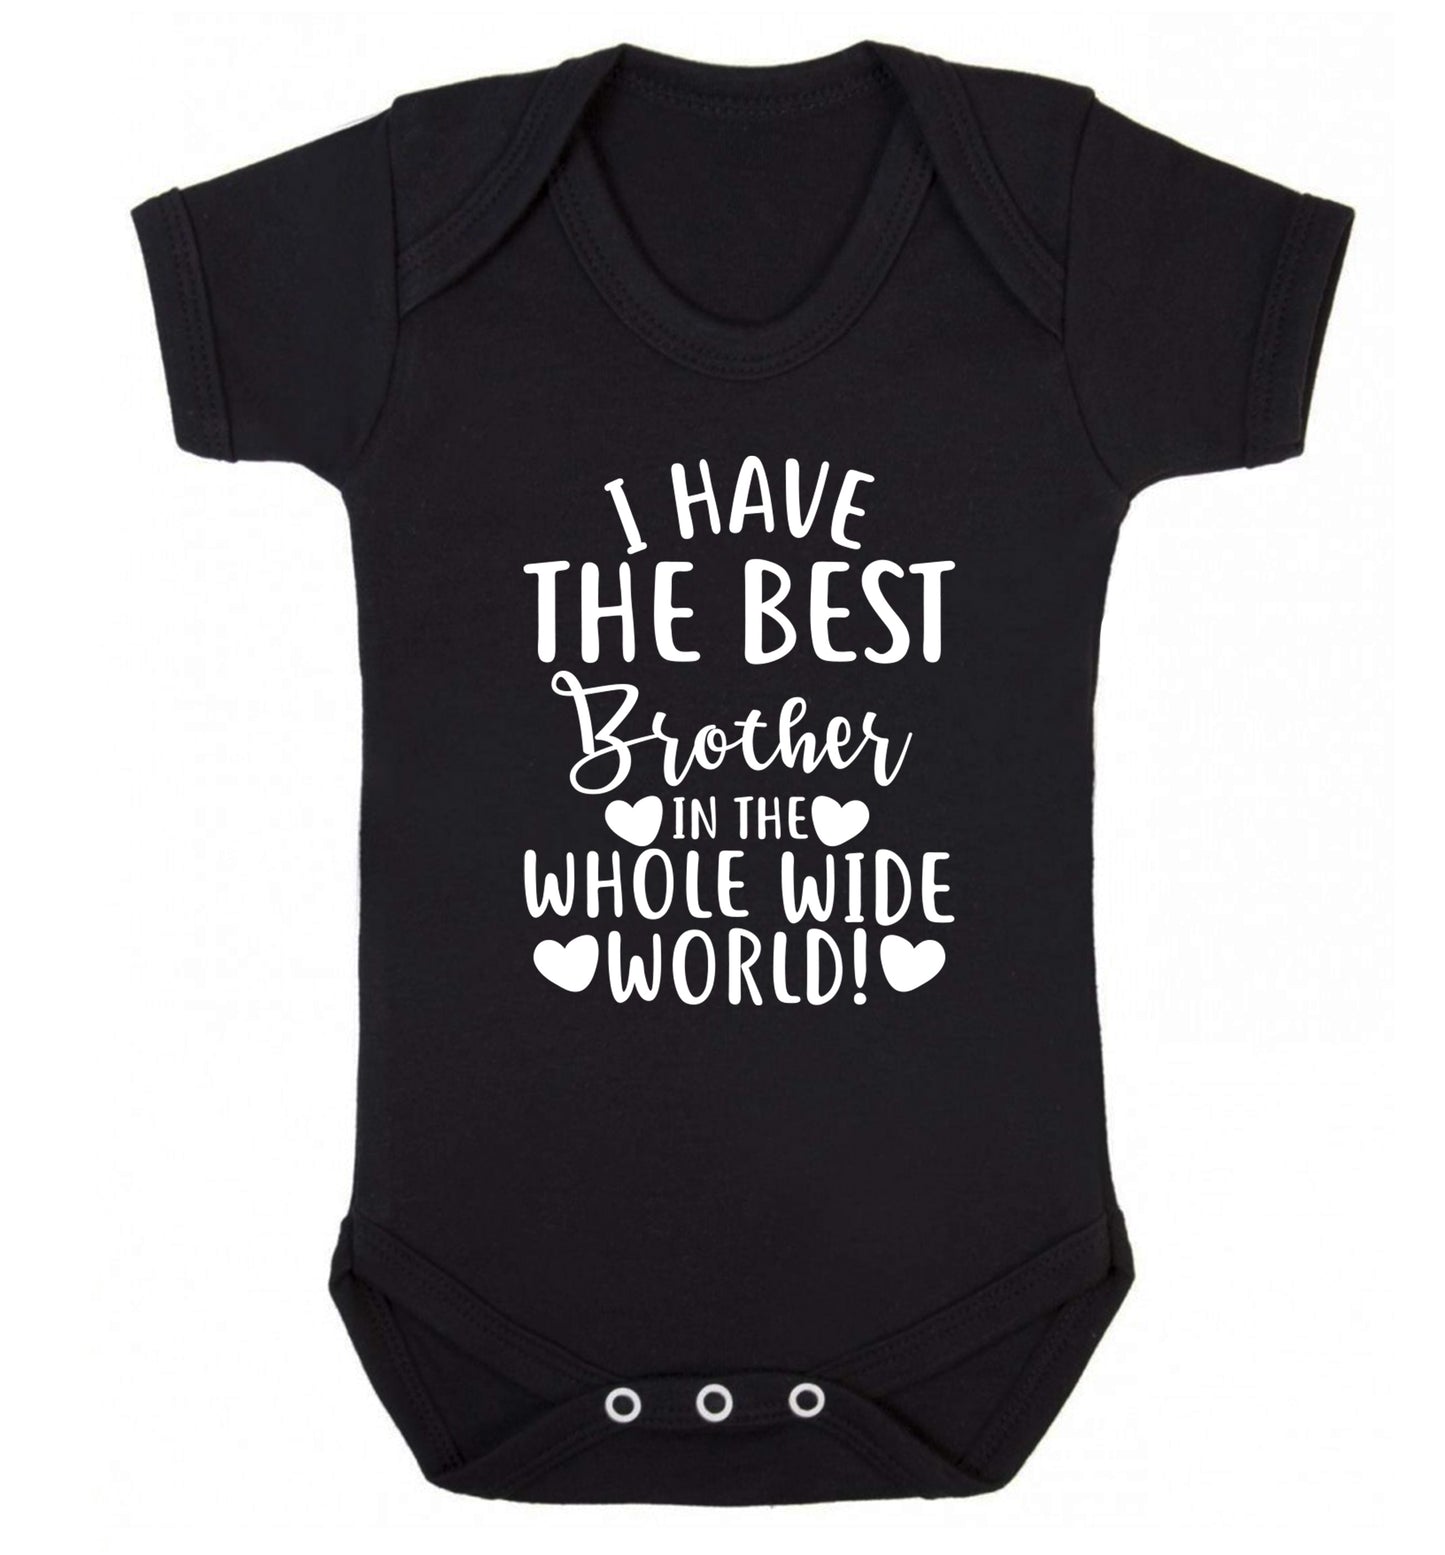 I have the best brother in the whole wide world! Baby Vest black 18-24 months